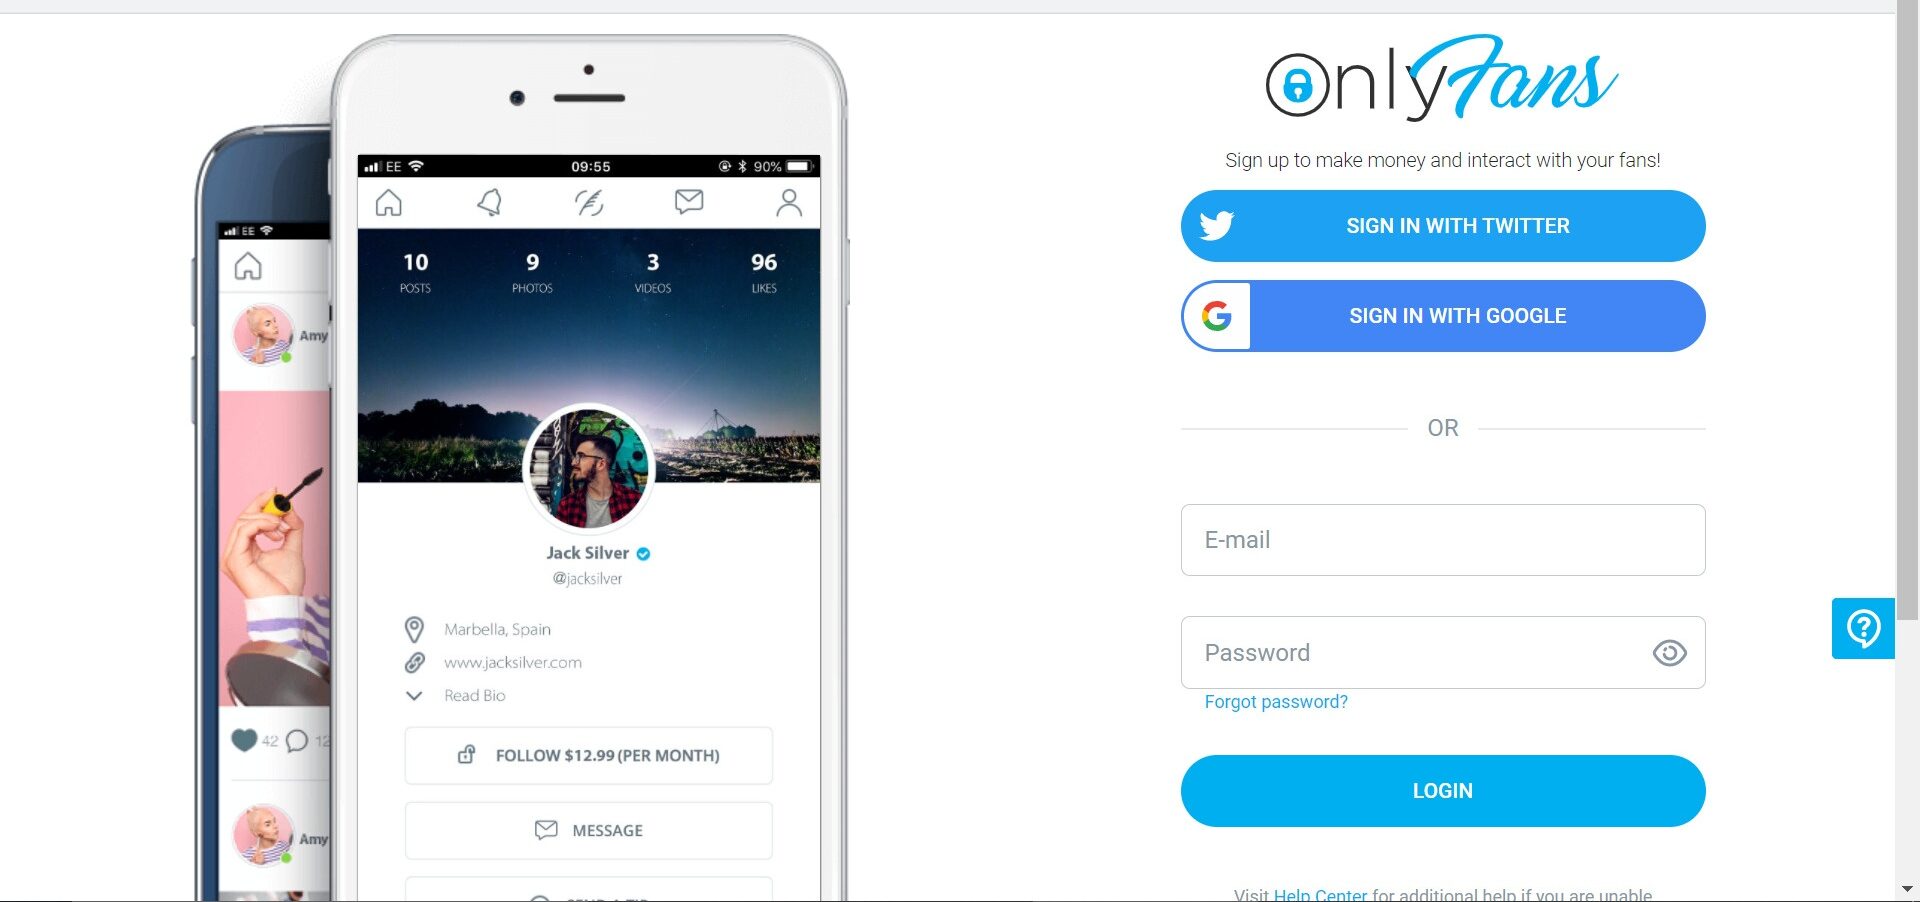 How To Get Followers On Onlyfans Without Social Media